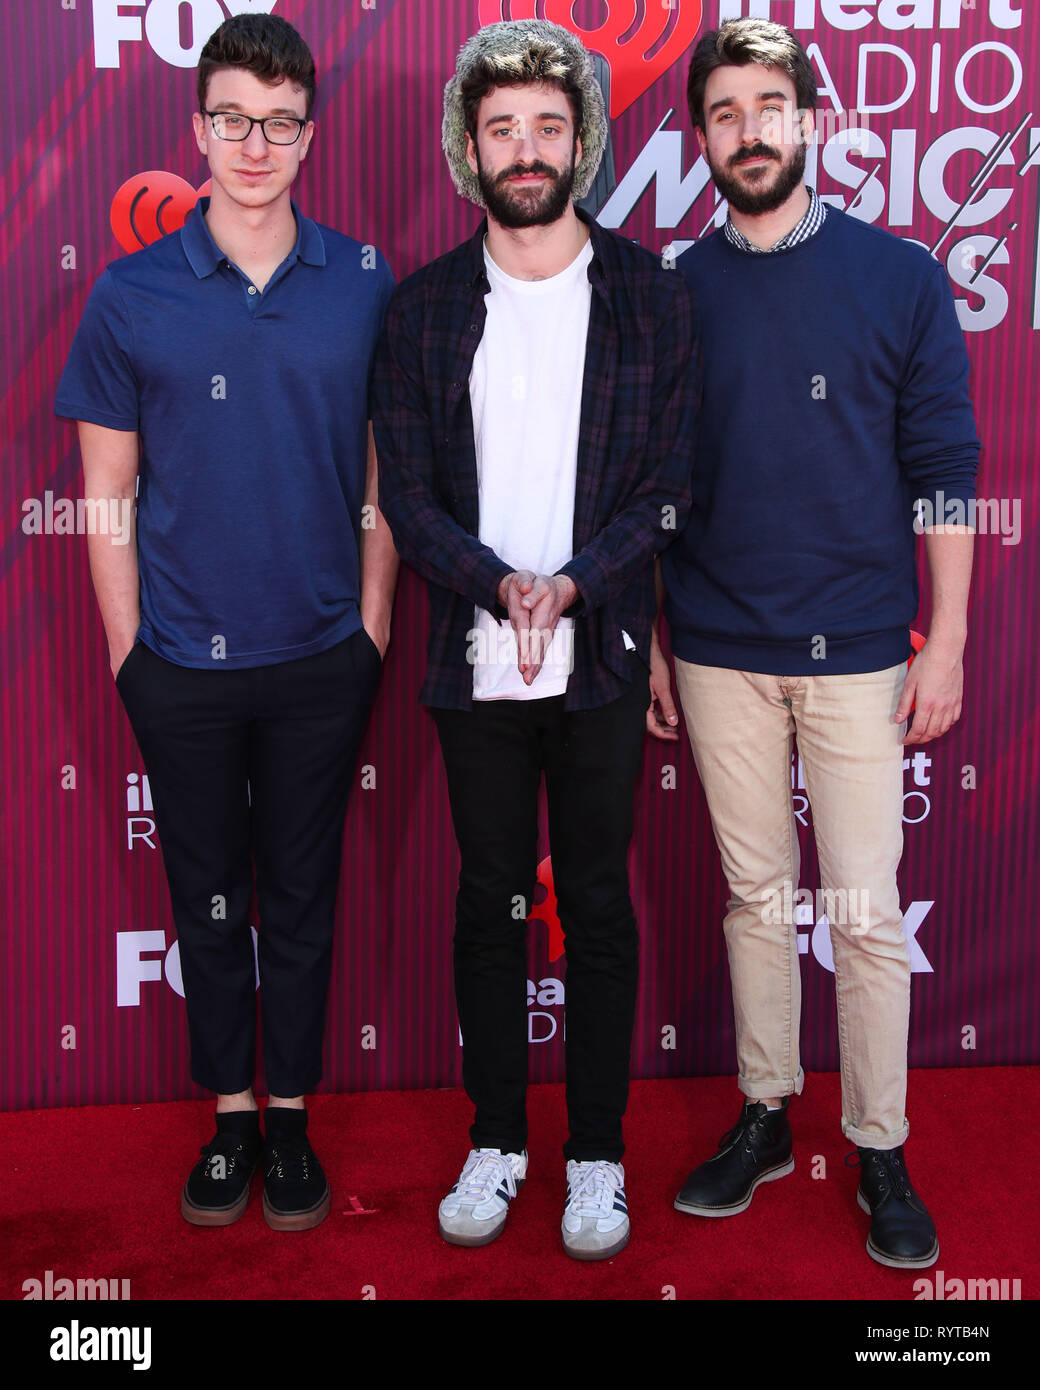 LOS ANGELES, CA, USA - MARCH 14: Ryan Joshua Met, Jack Evan Met and Adam Brett Met of AJR arrive at the 2019 iHeartRadio Music Awards held at Microsoft Theater at L.A. Live on March 14, 2019 in Los Angeles, California, United States. (Photo by Xavier Collin/Image Press Agency) Stock Photo